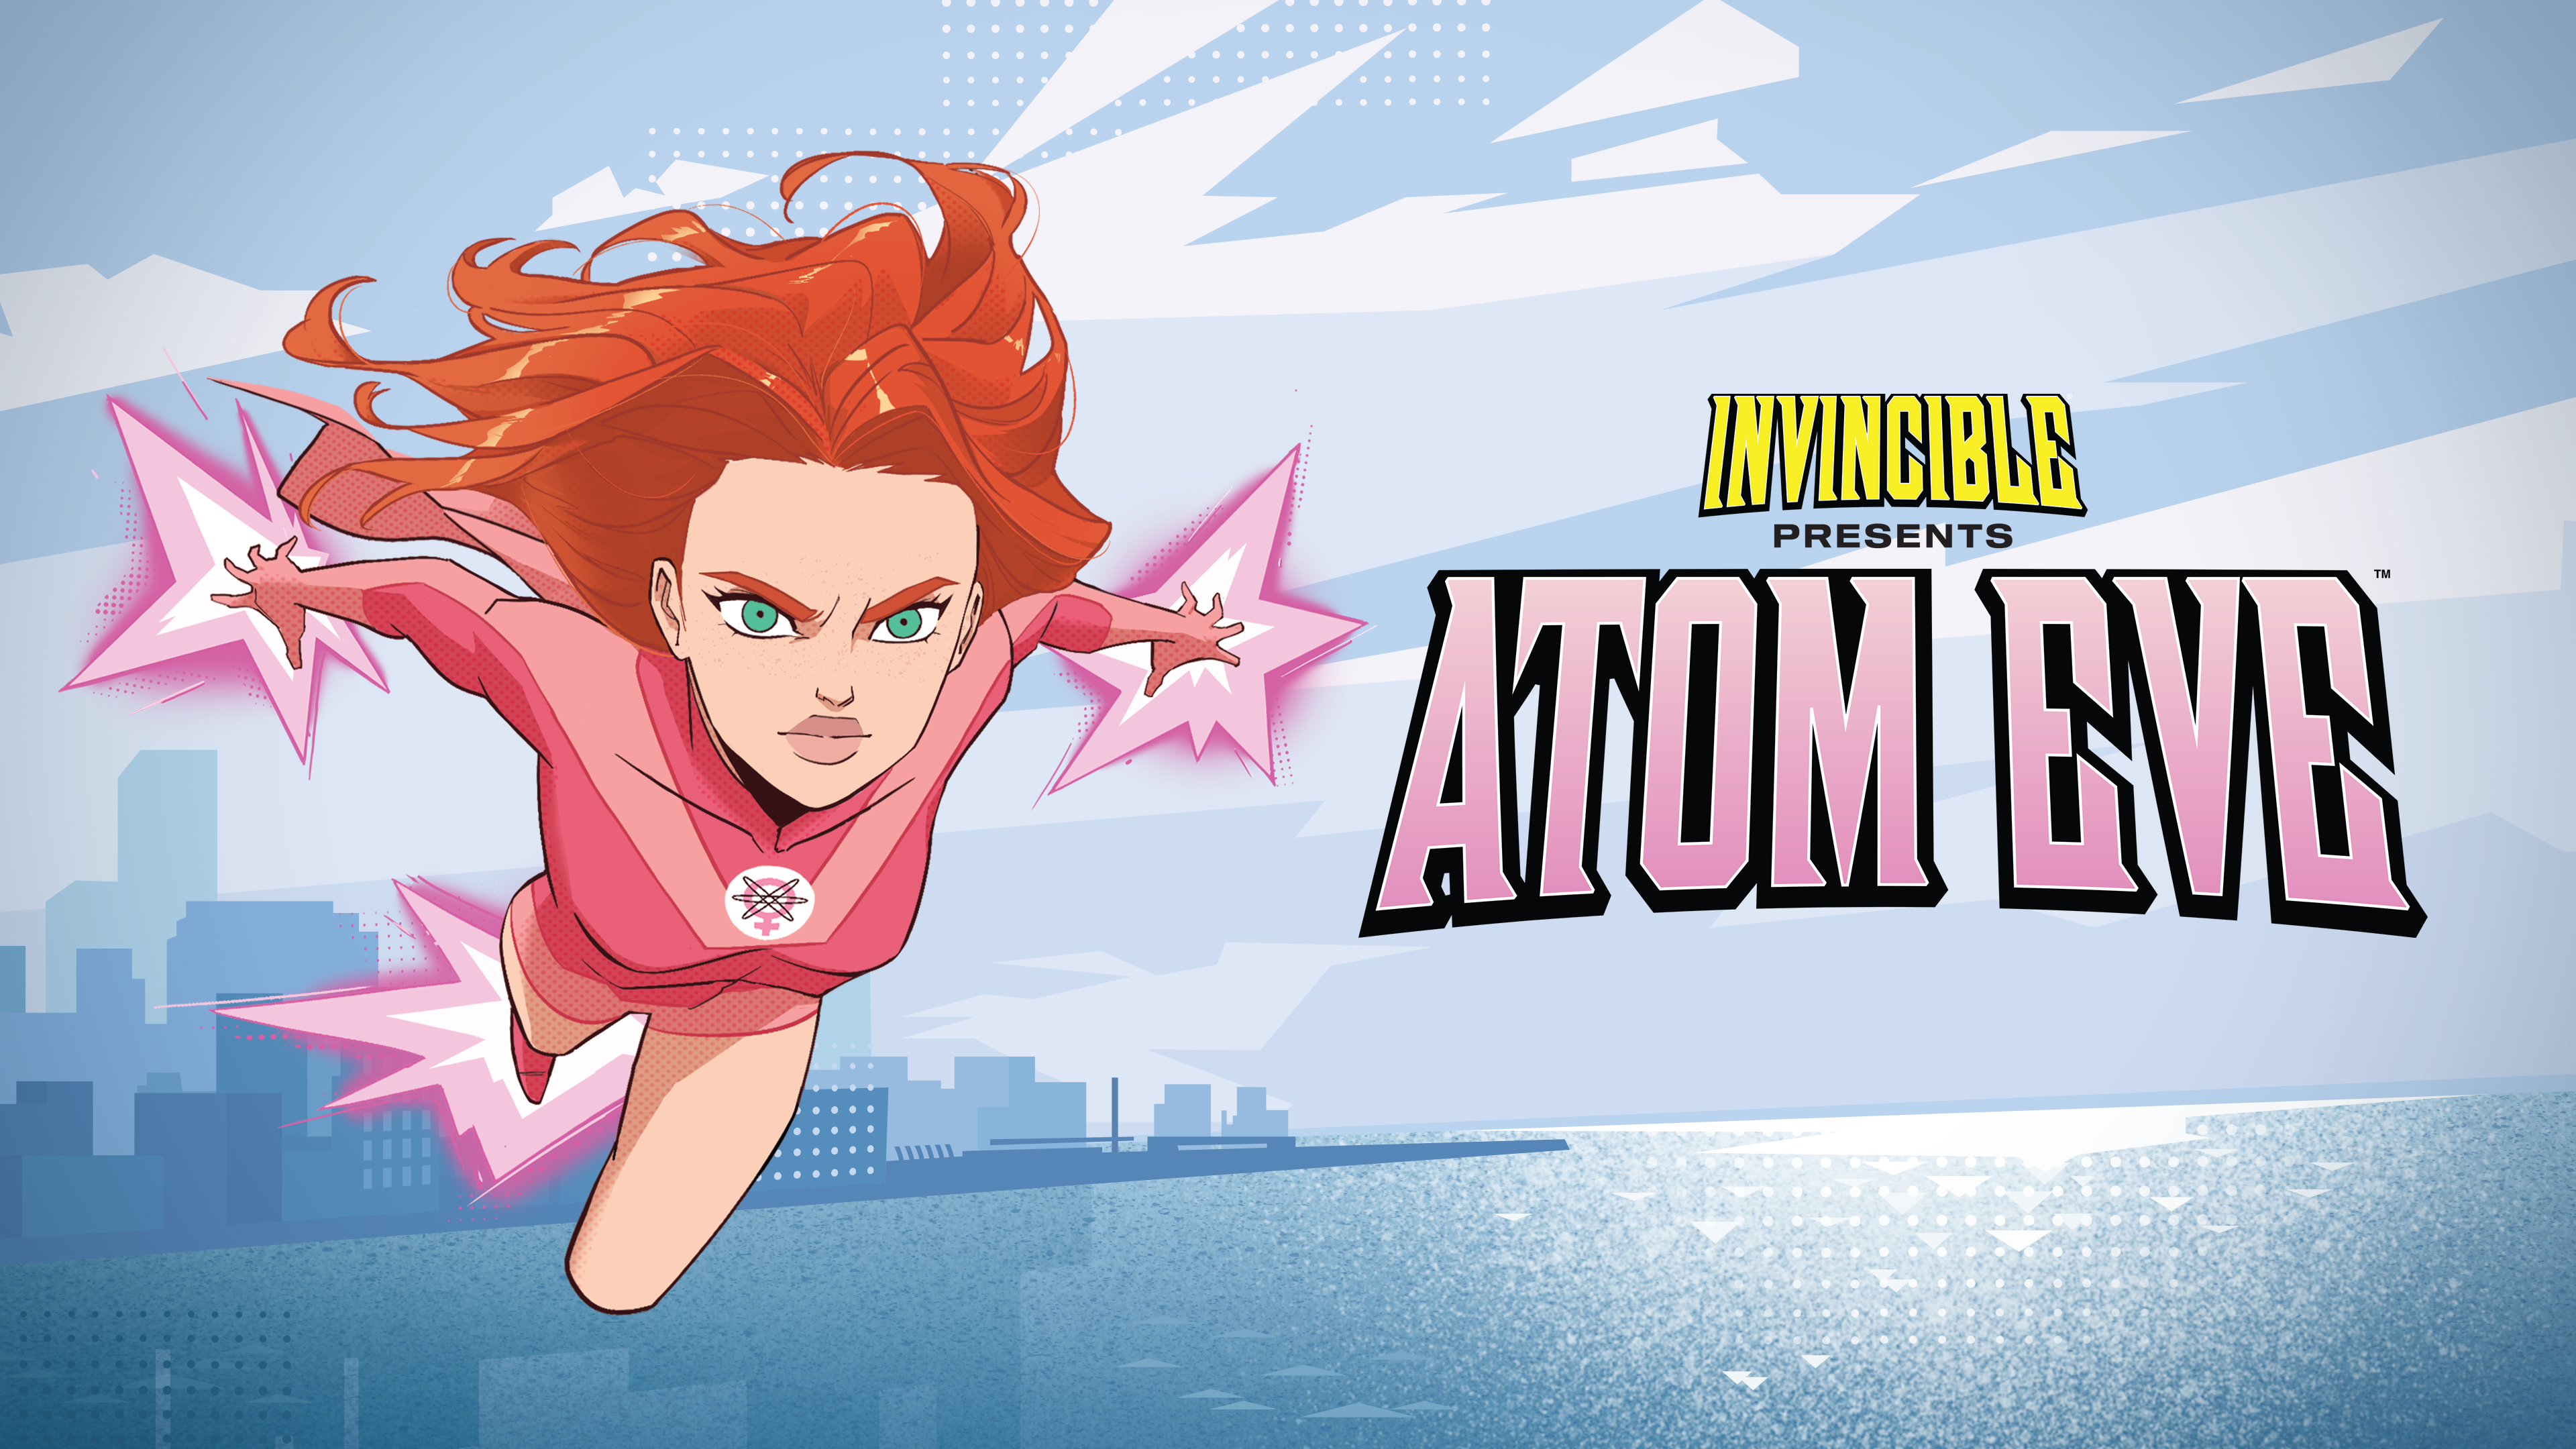 'Invincible Presents: Atom Eve' is the comic book RPG you don’t want to miss